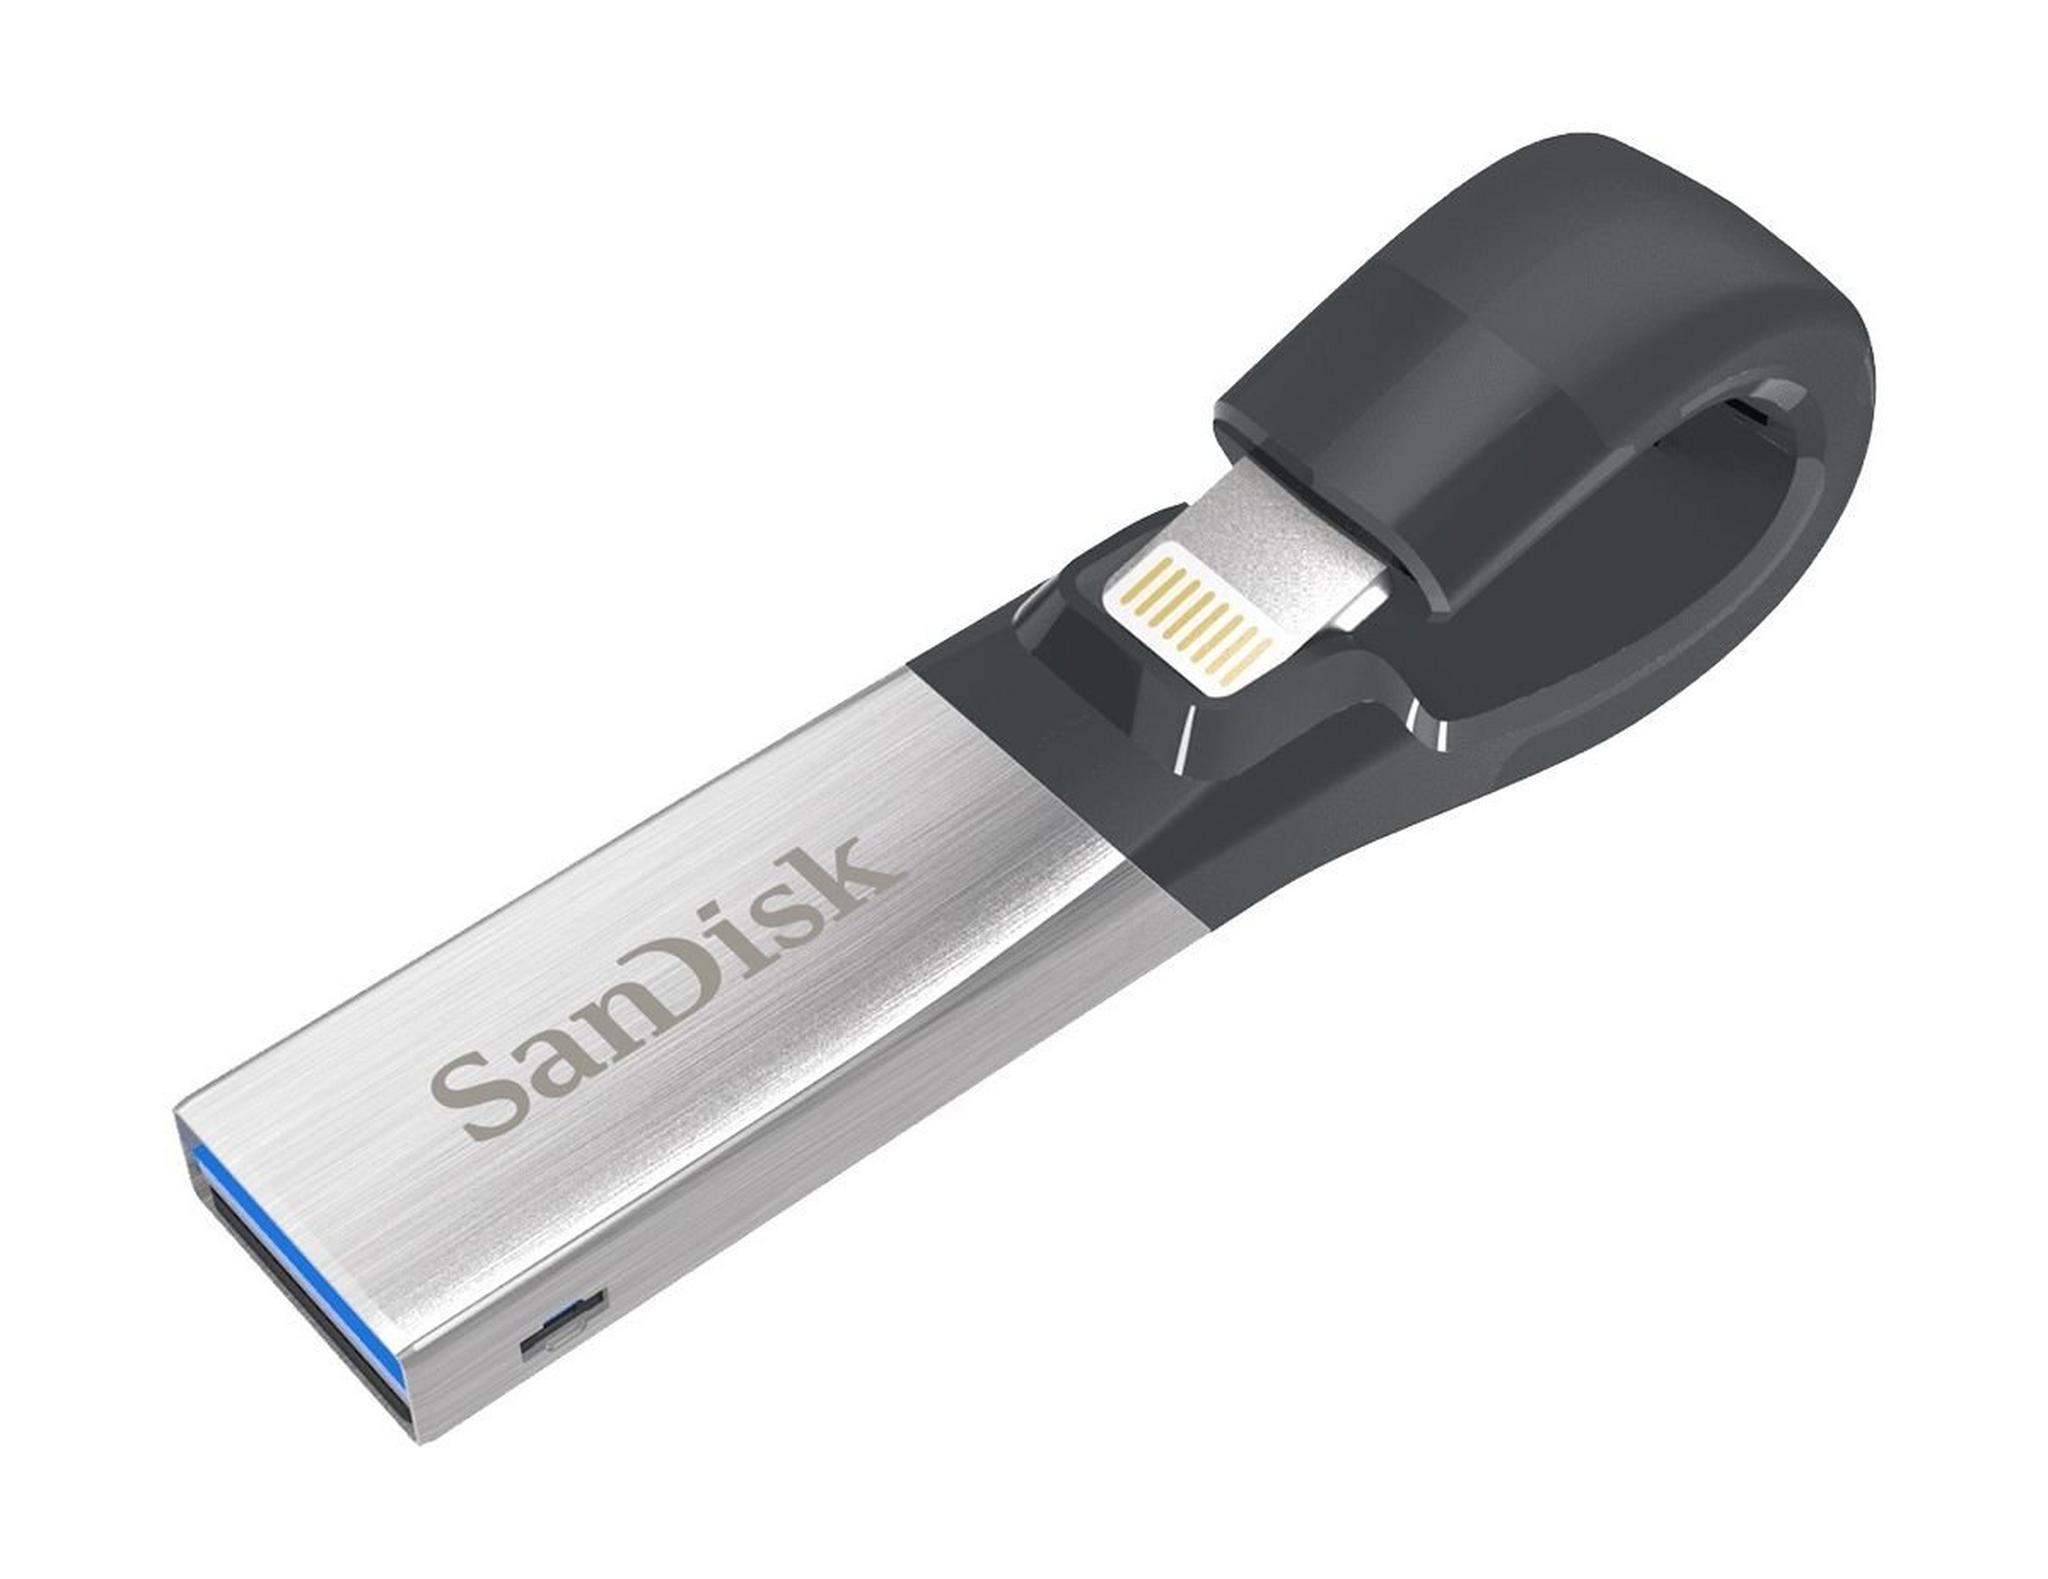 SanDisk iXpand 32GB Flash Drive For iPhone And iPad (SDIX30C-032G)